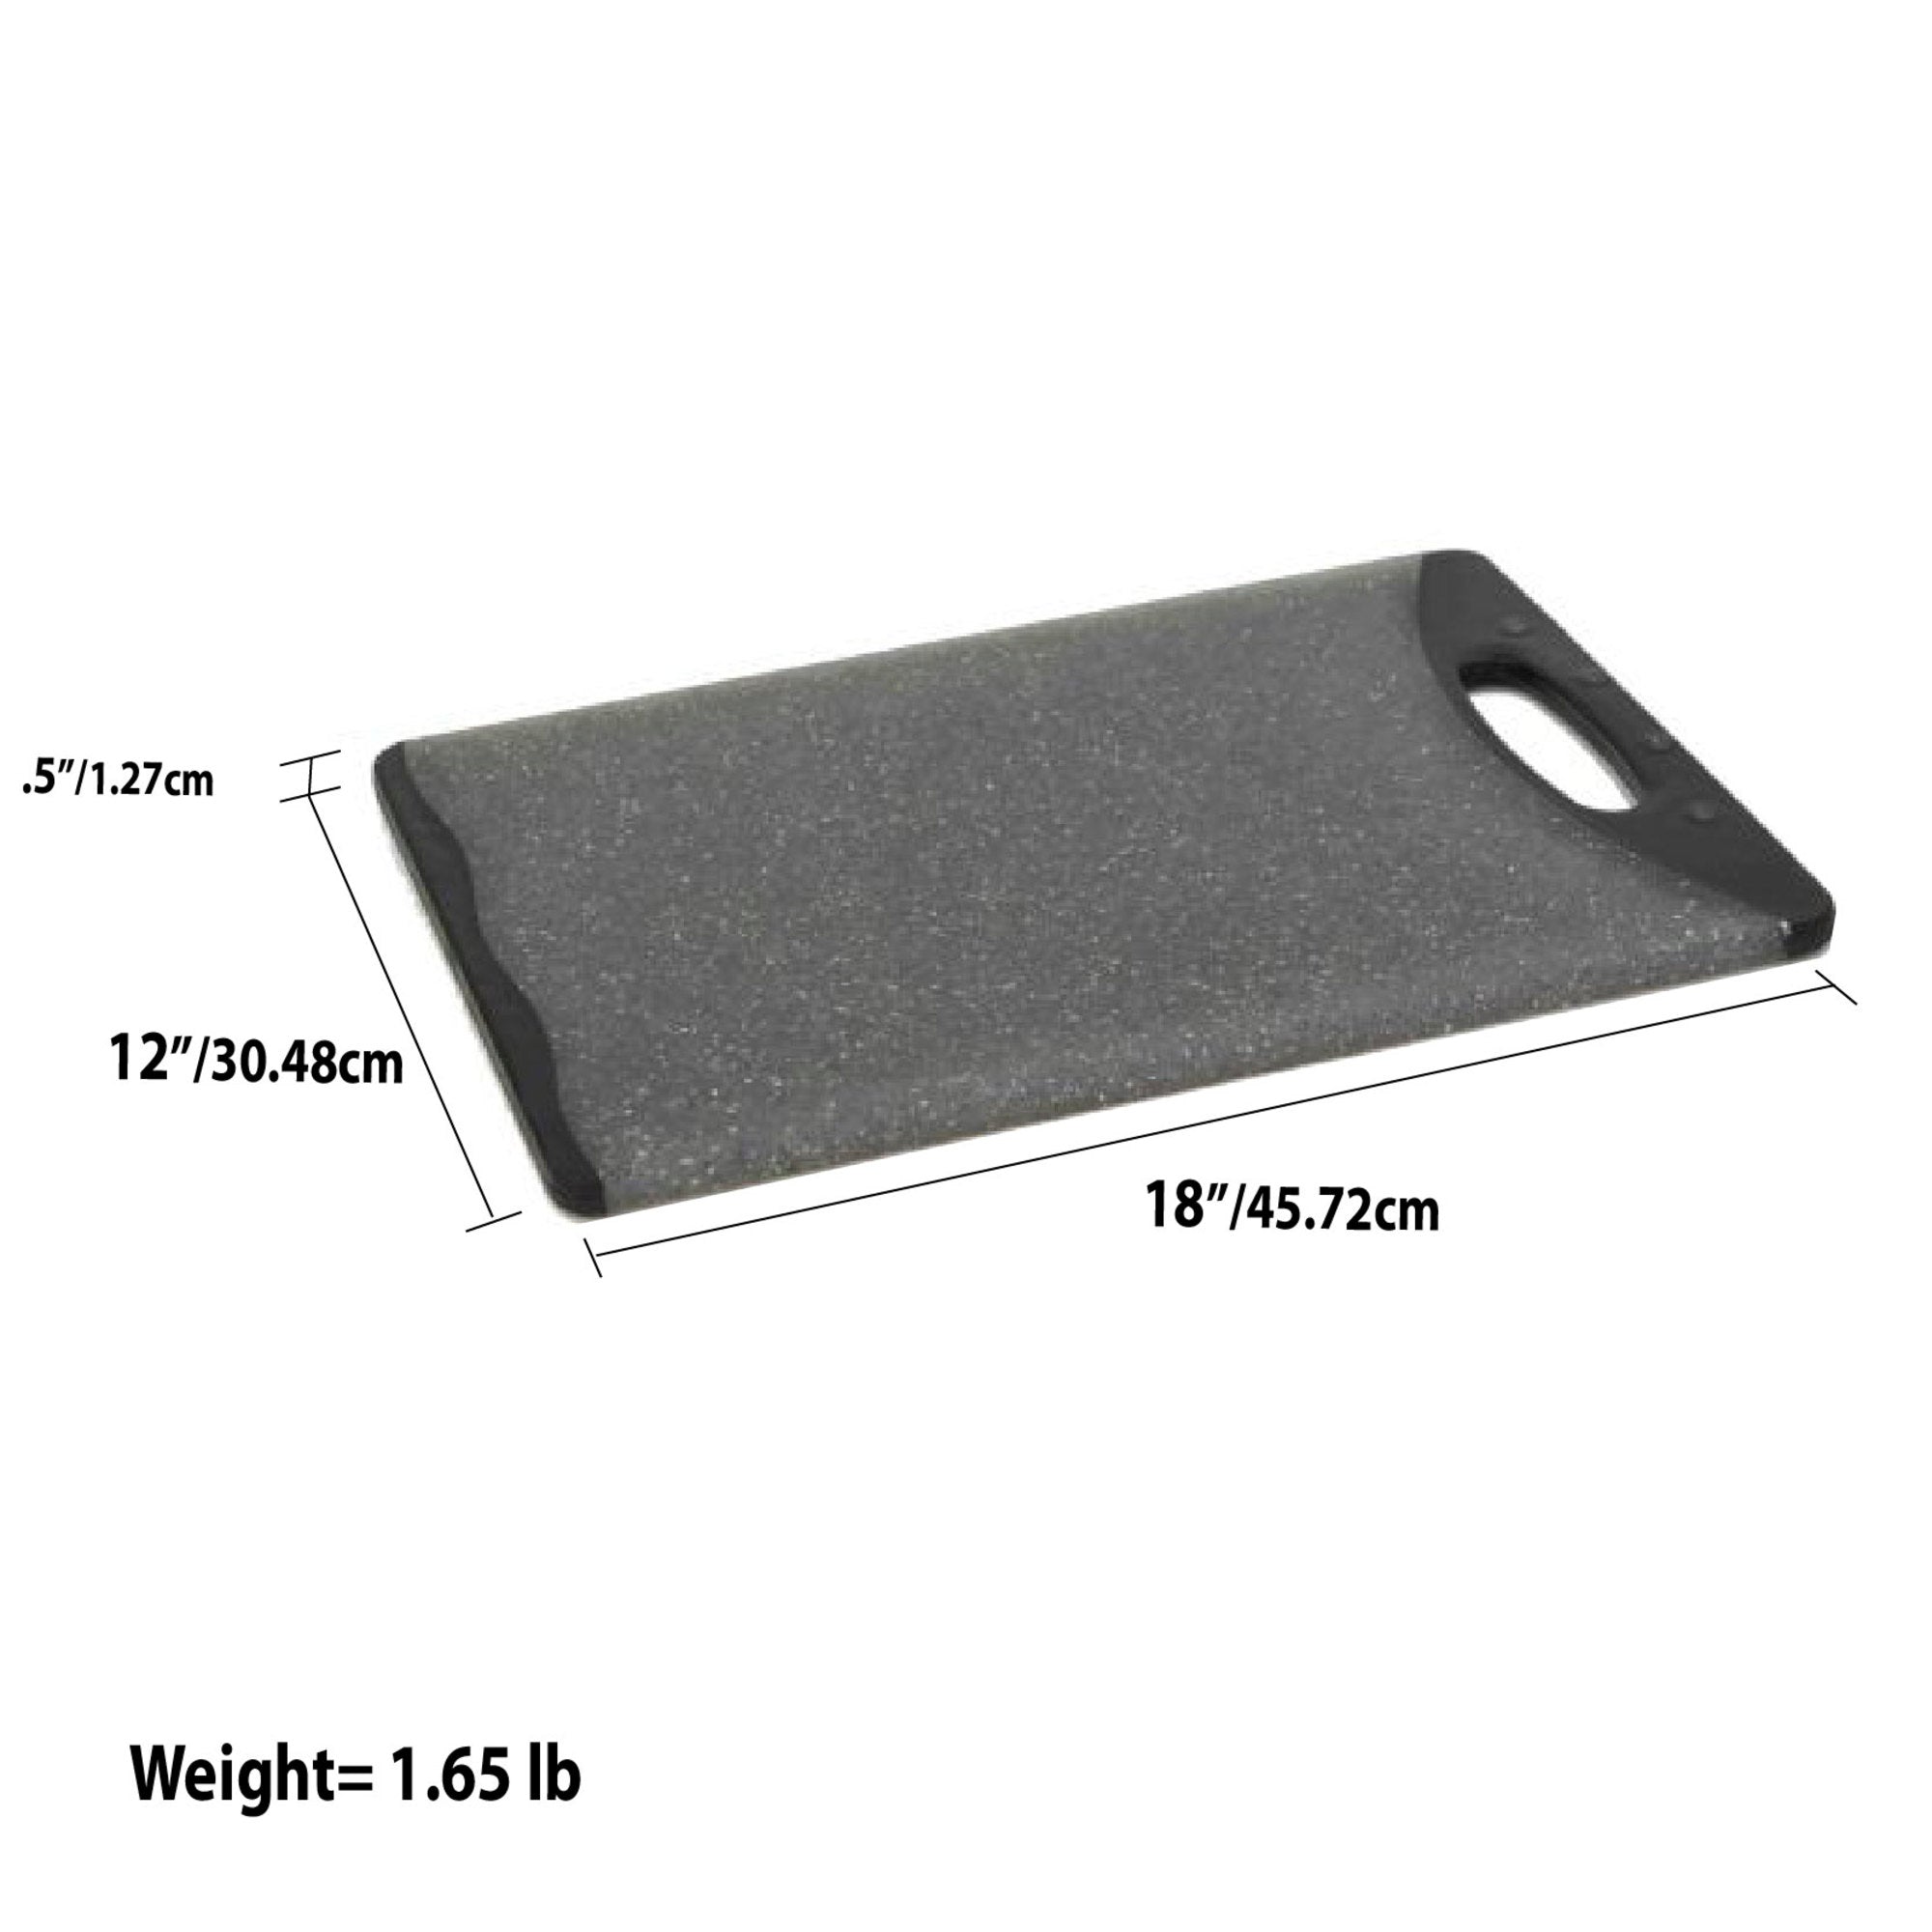 Home Basics Double Sided 12" x 18" Granite Plastic Cutting Board - Assorted Colors